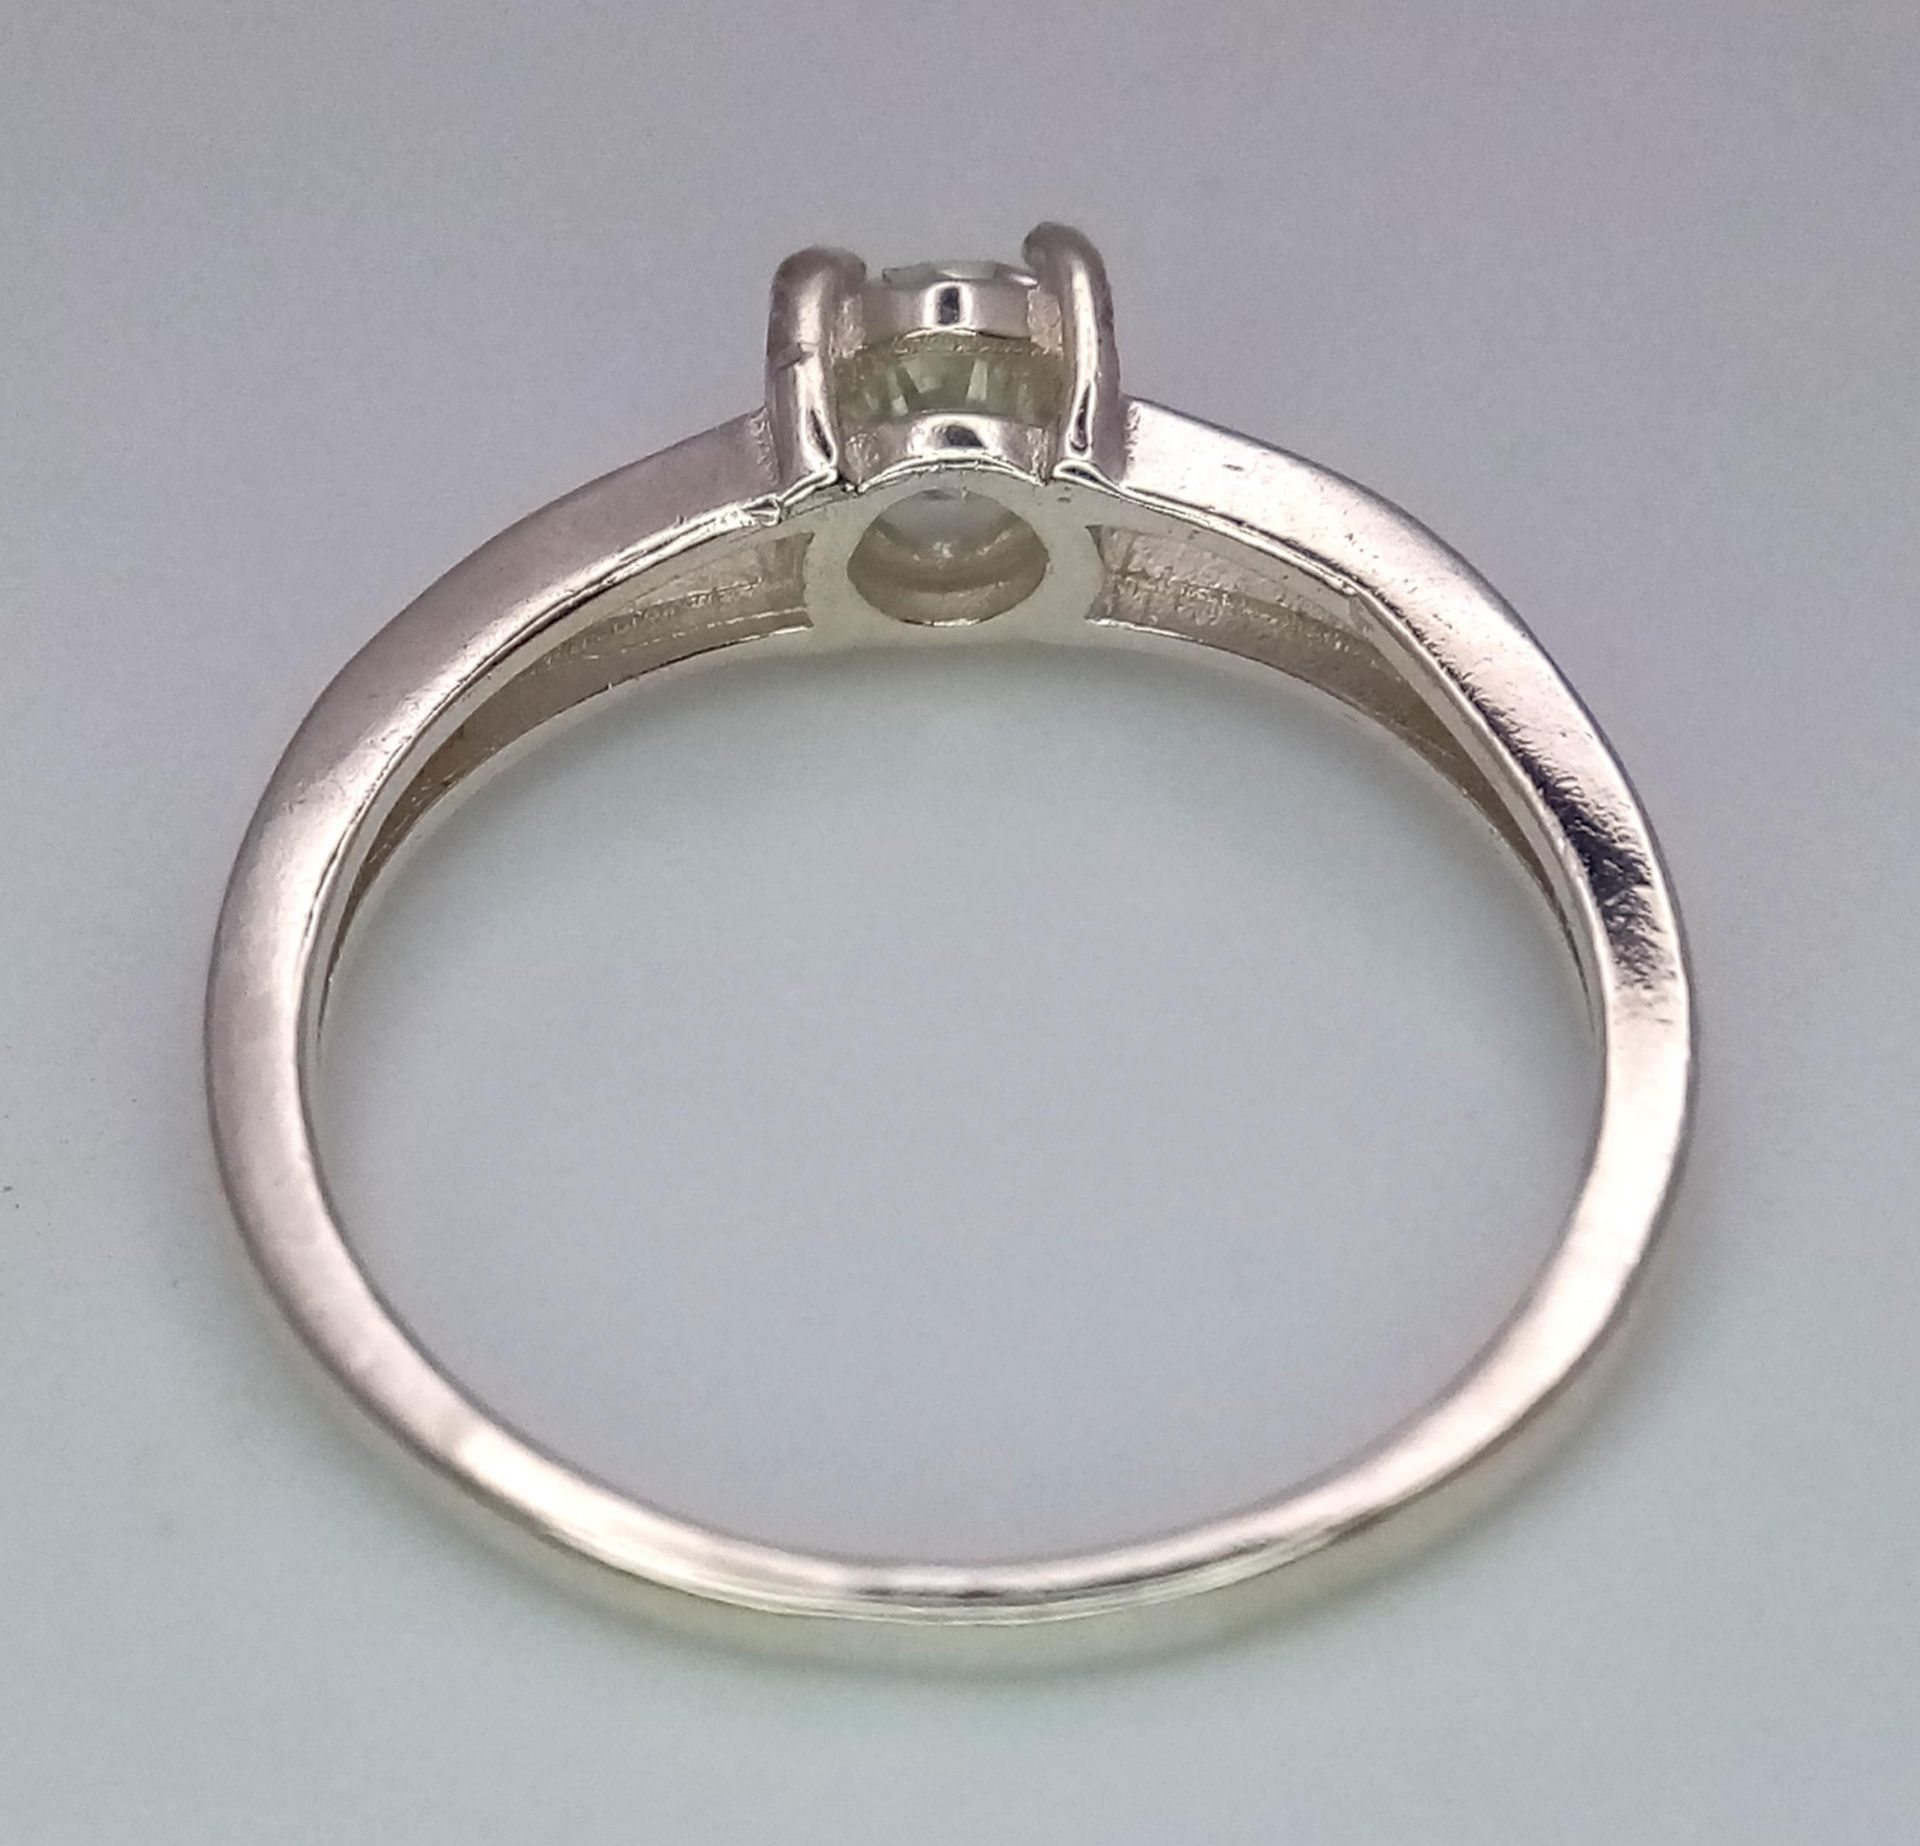 A 0.5ct Moissanite Solitaire Ring. Set in 925 silver. Comes with a GRA certificate. Size M. - Image 4 of 6